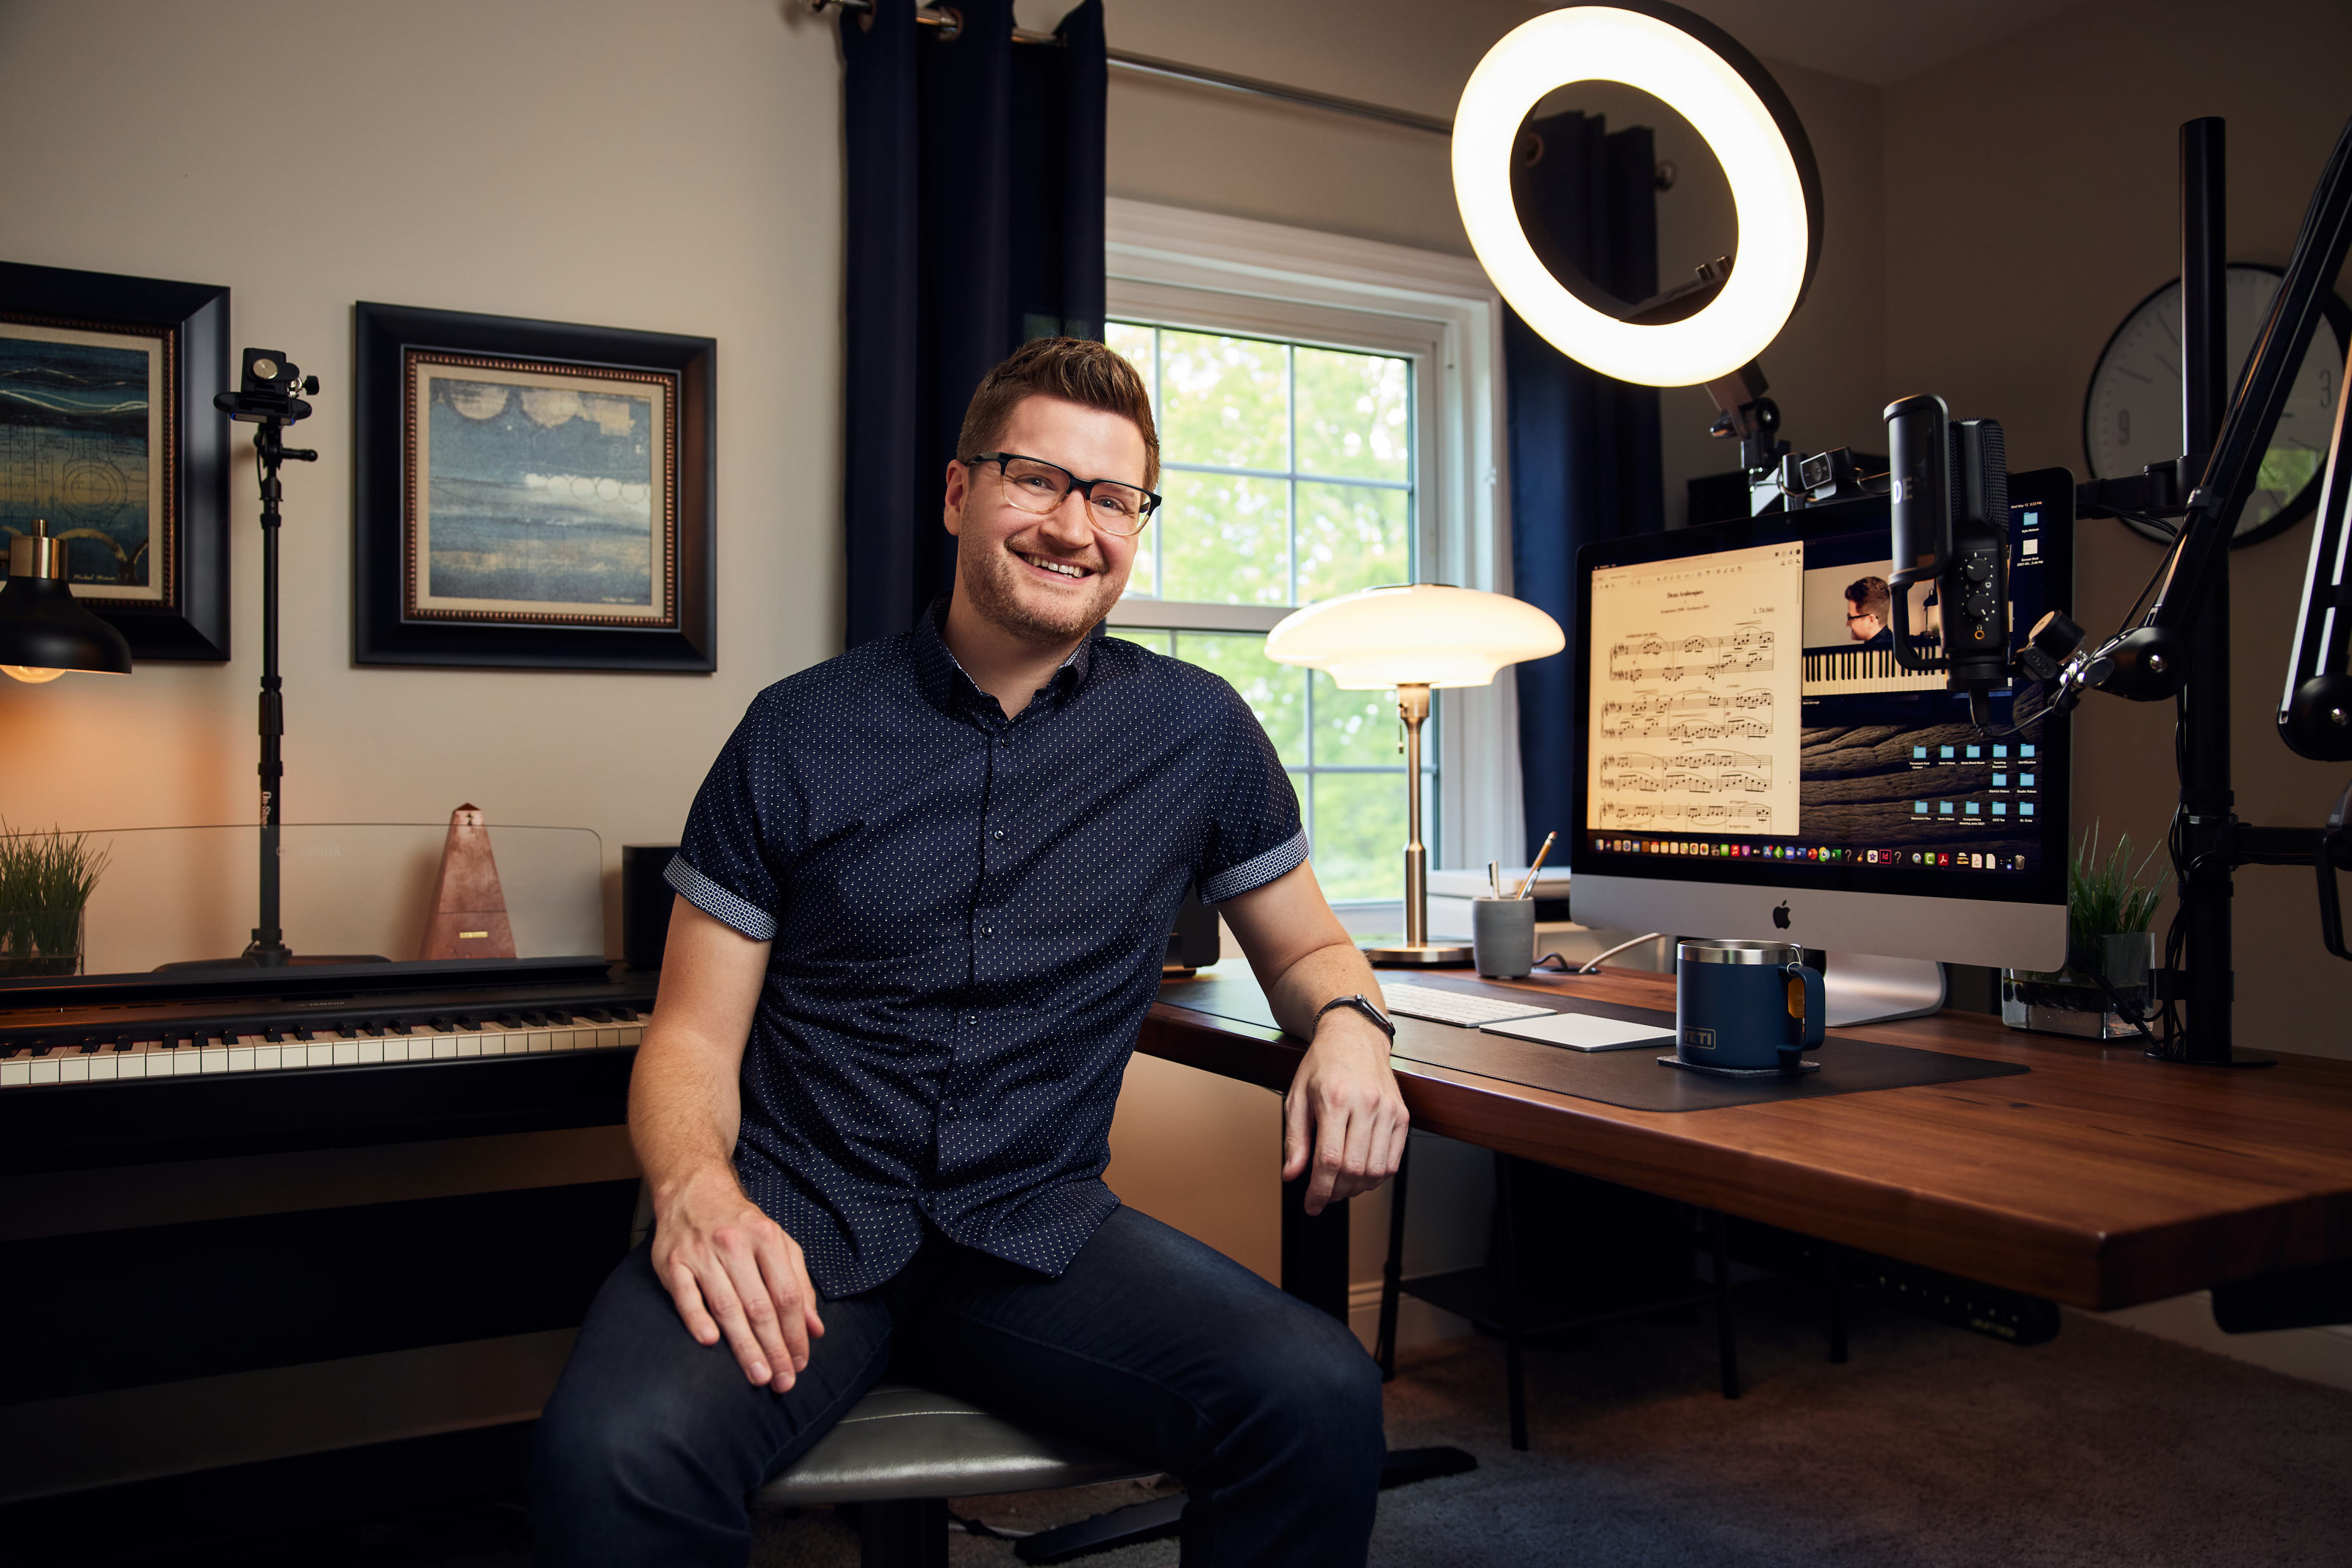 Davis Dorrough sitting in his virtual studio space with ring light, computer, and digital piano